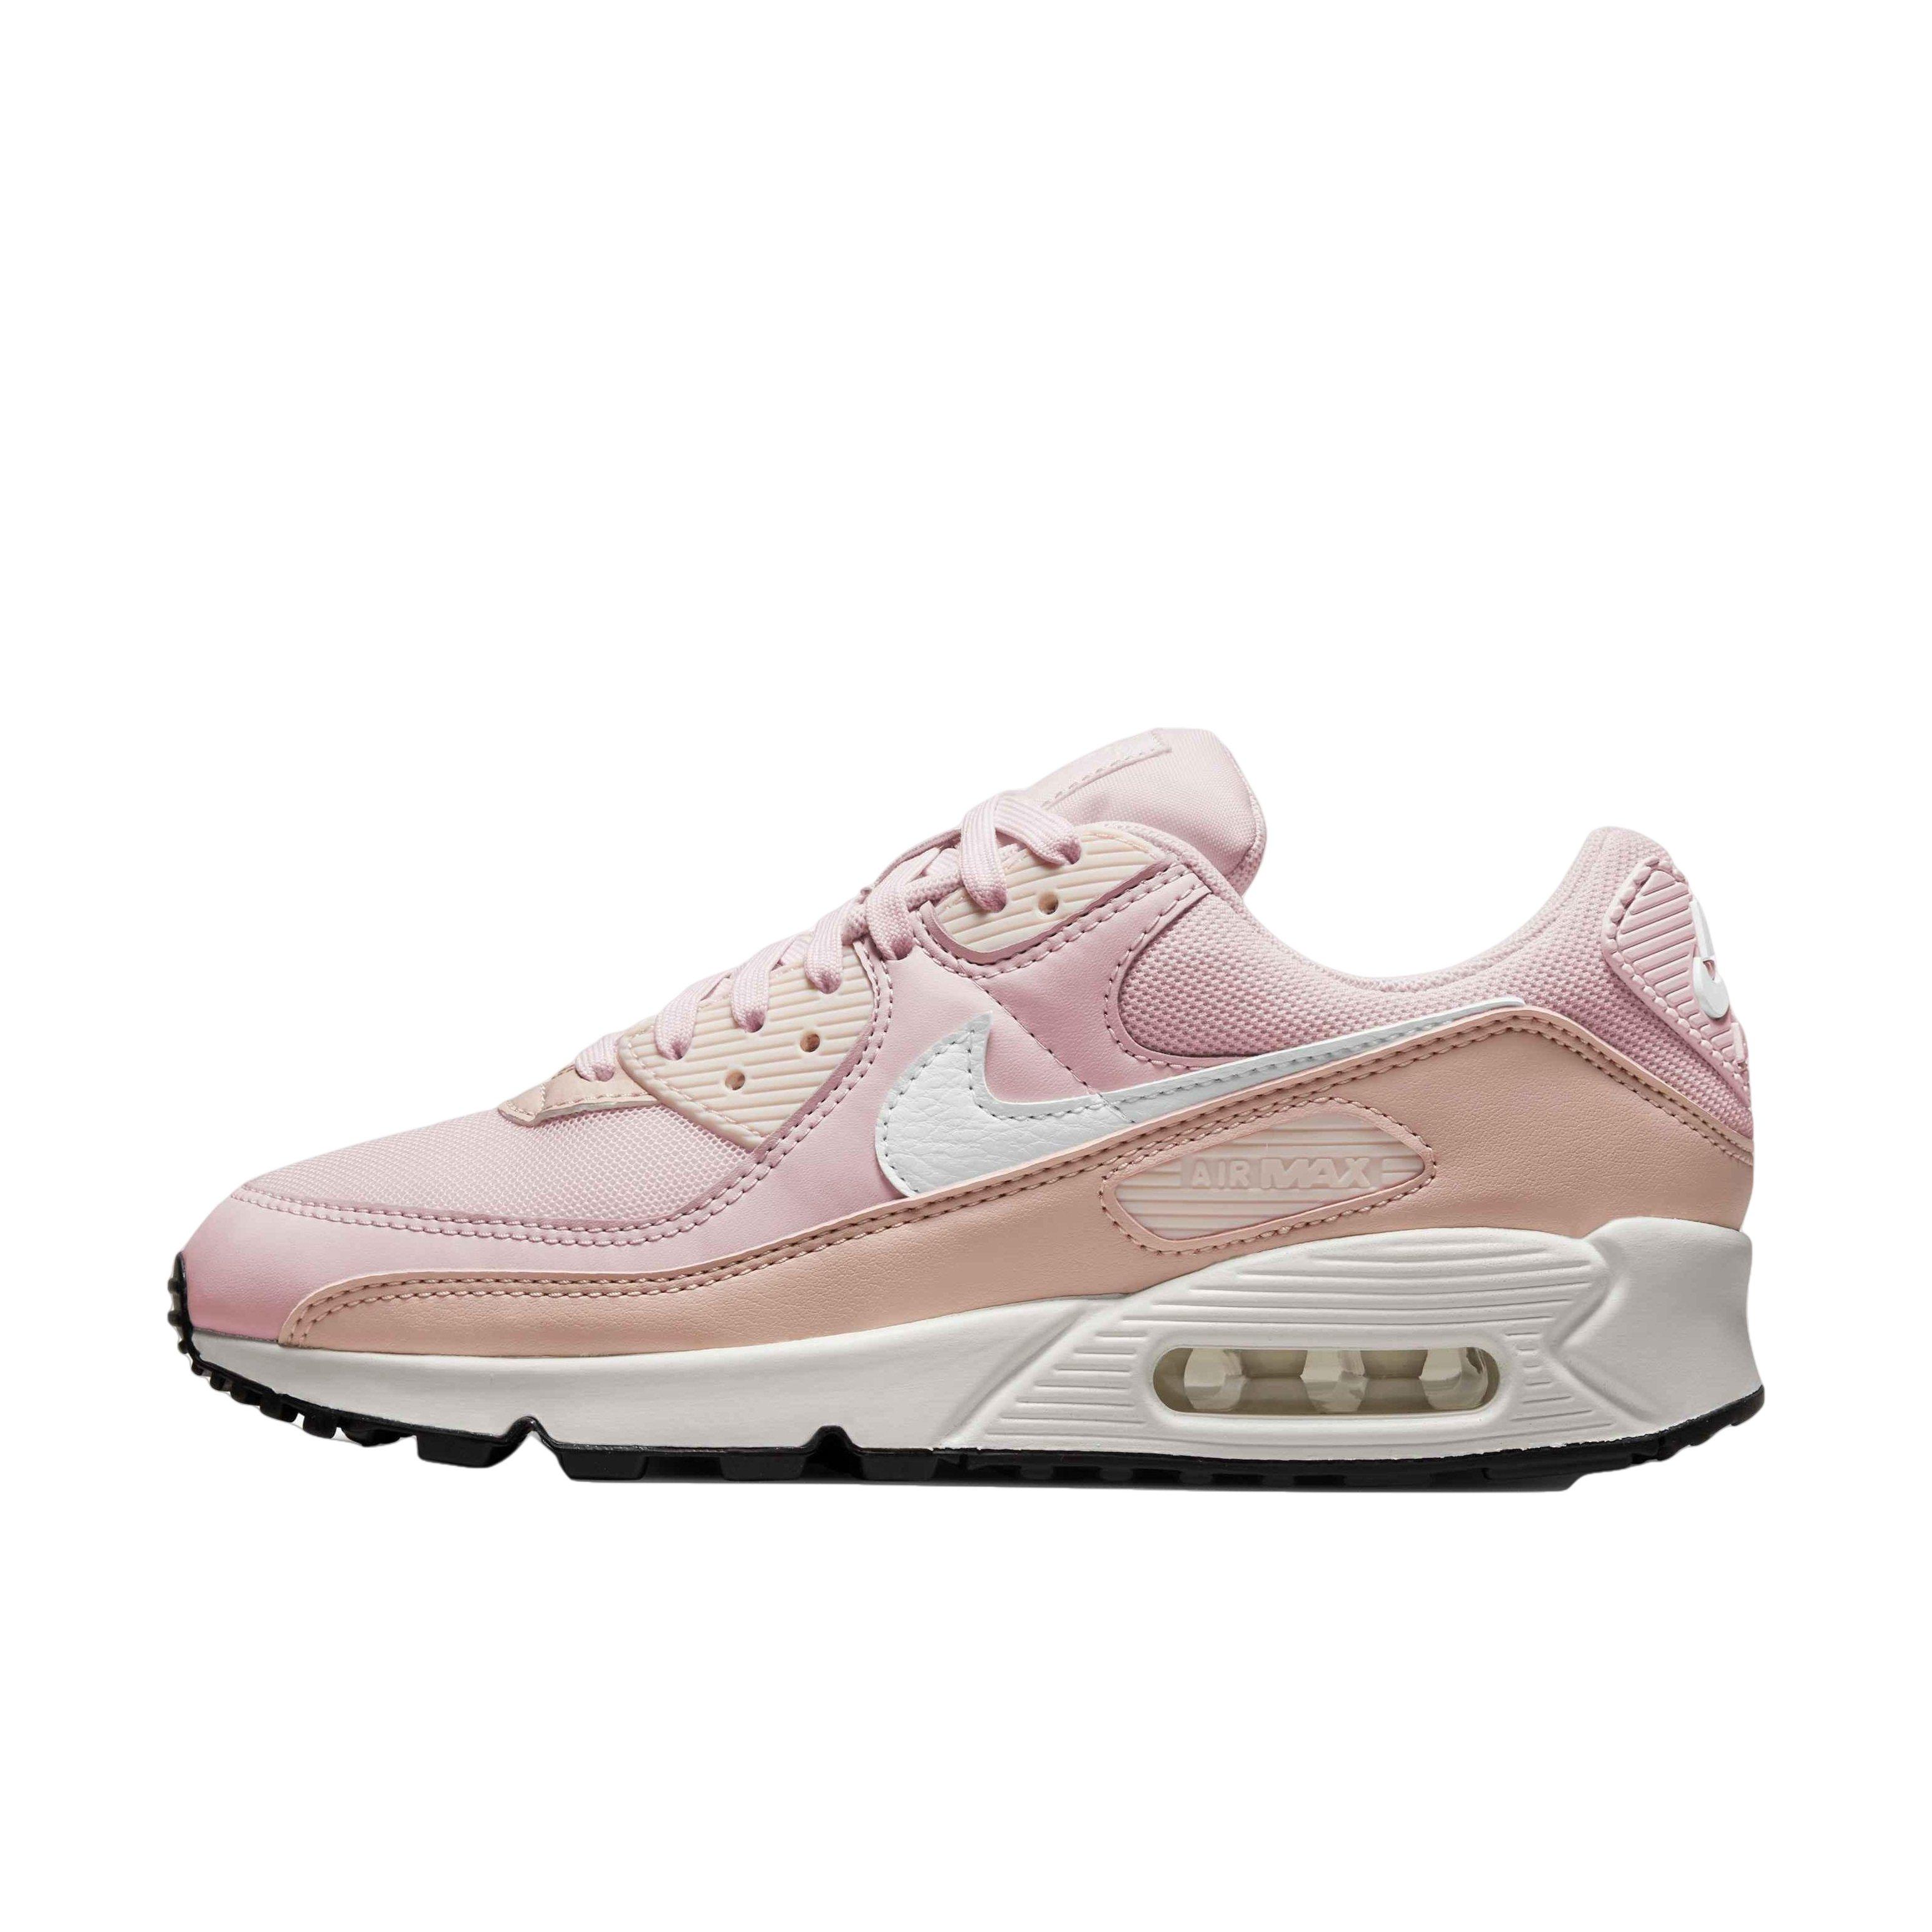 Air Max 90 "Barely Rose/Summit White/Pink Oxford" Shoe